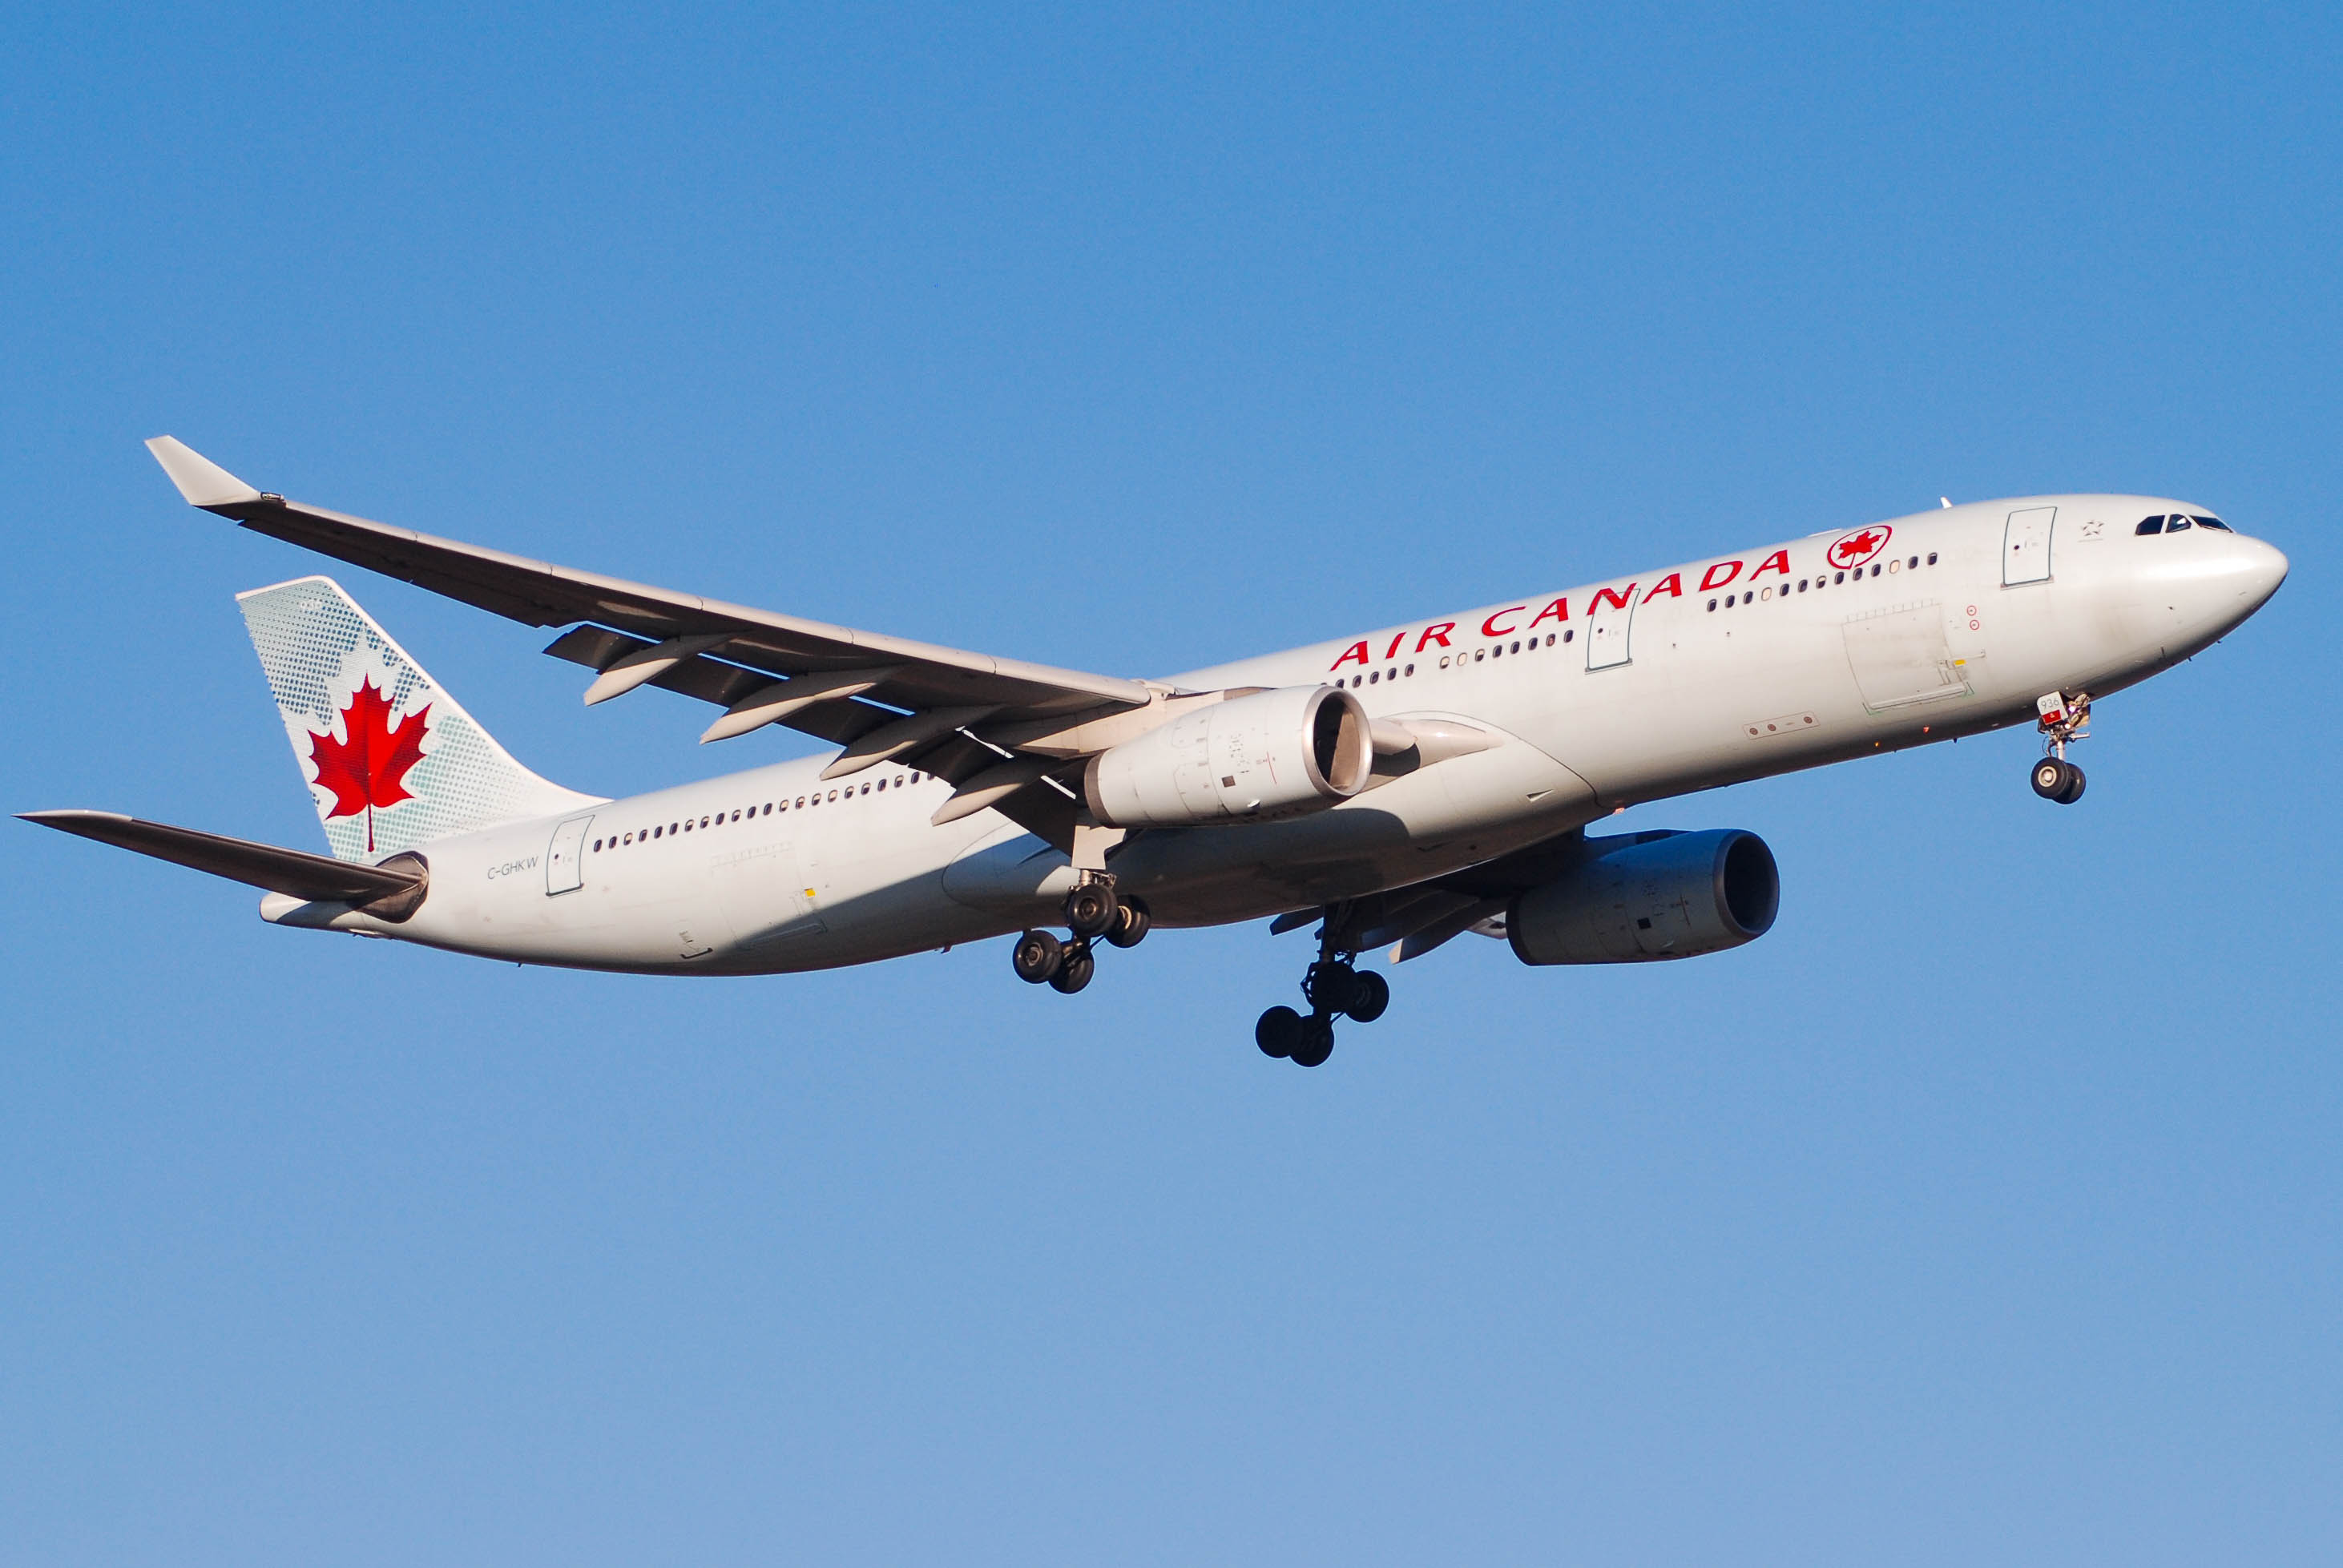 C-GHKW/CGHKW Air Canada Airbus A330 Airframe Information - AVSpotters.com